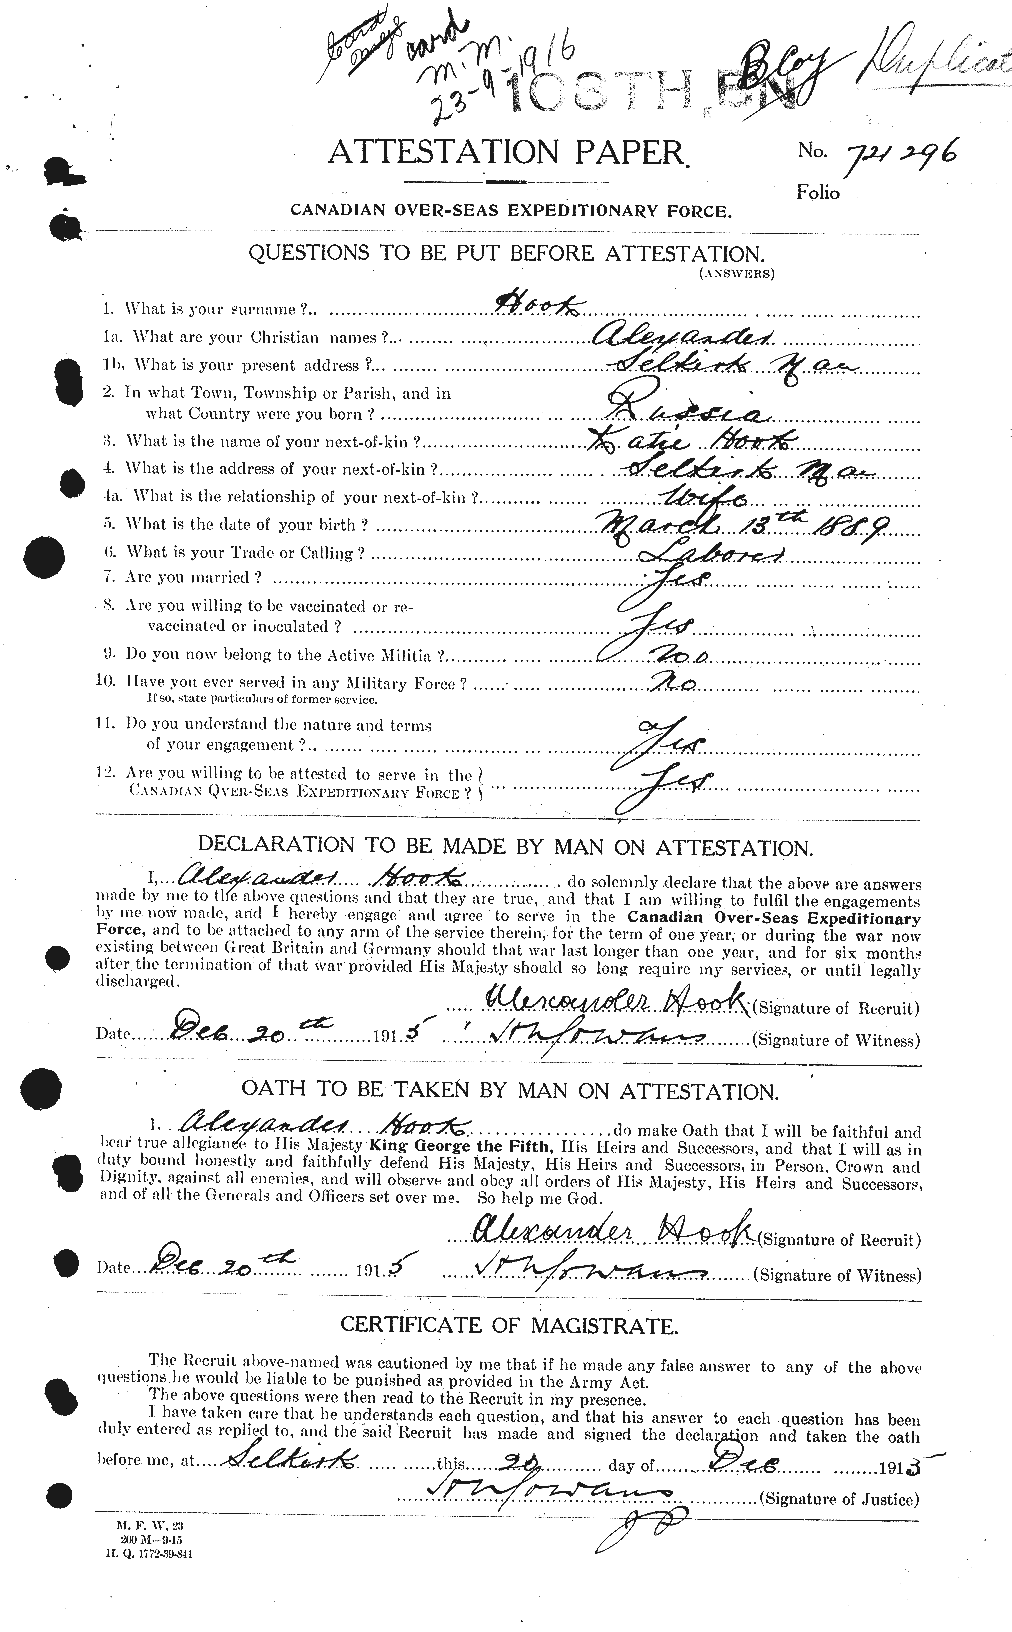 Personnel Records of the First World War - CEF 398121a